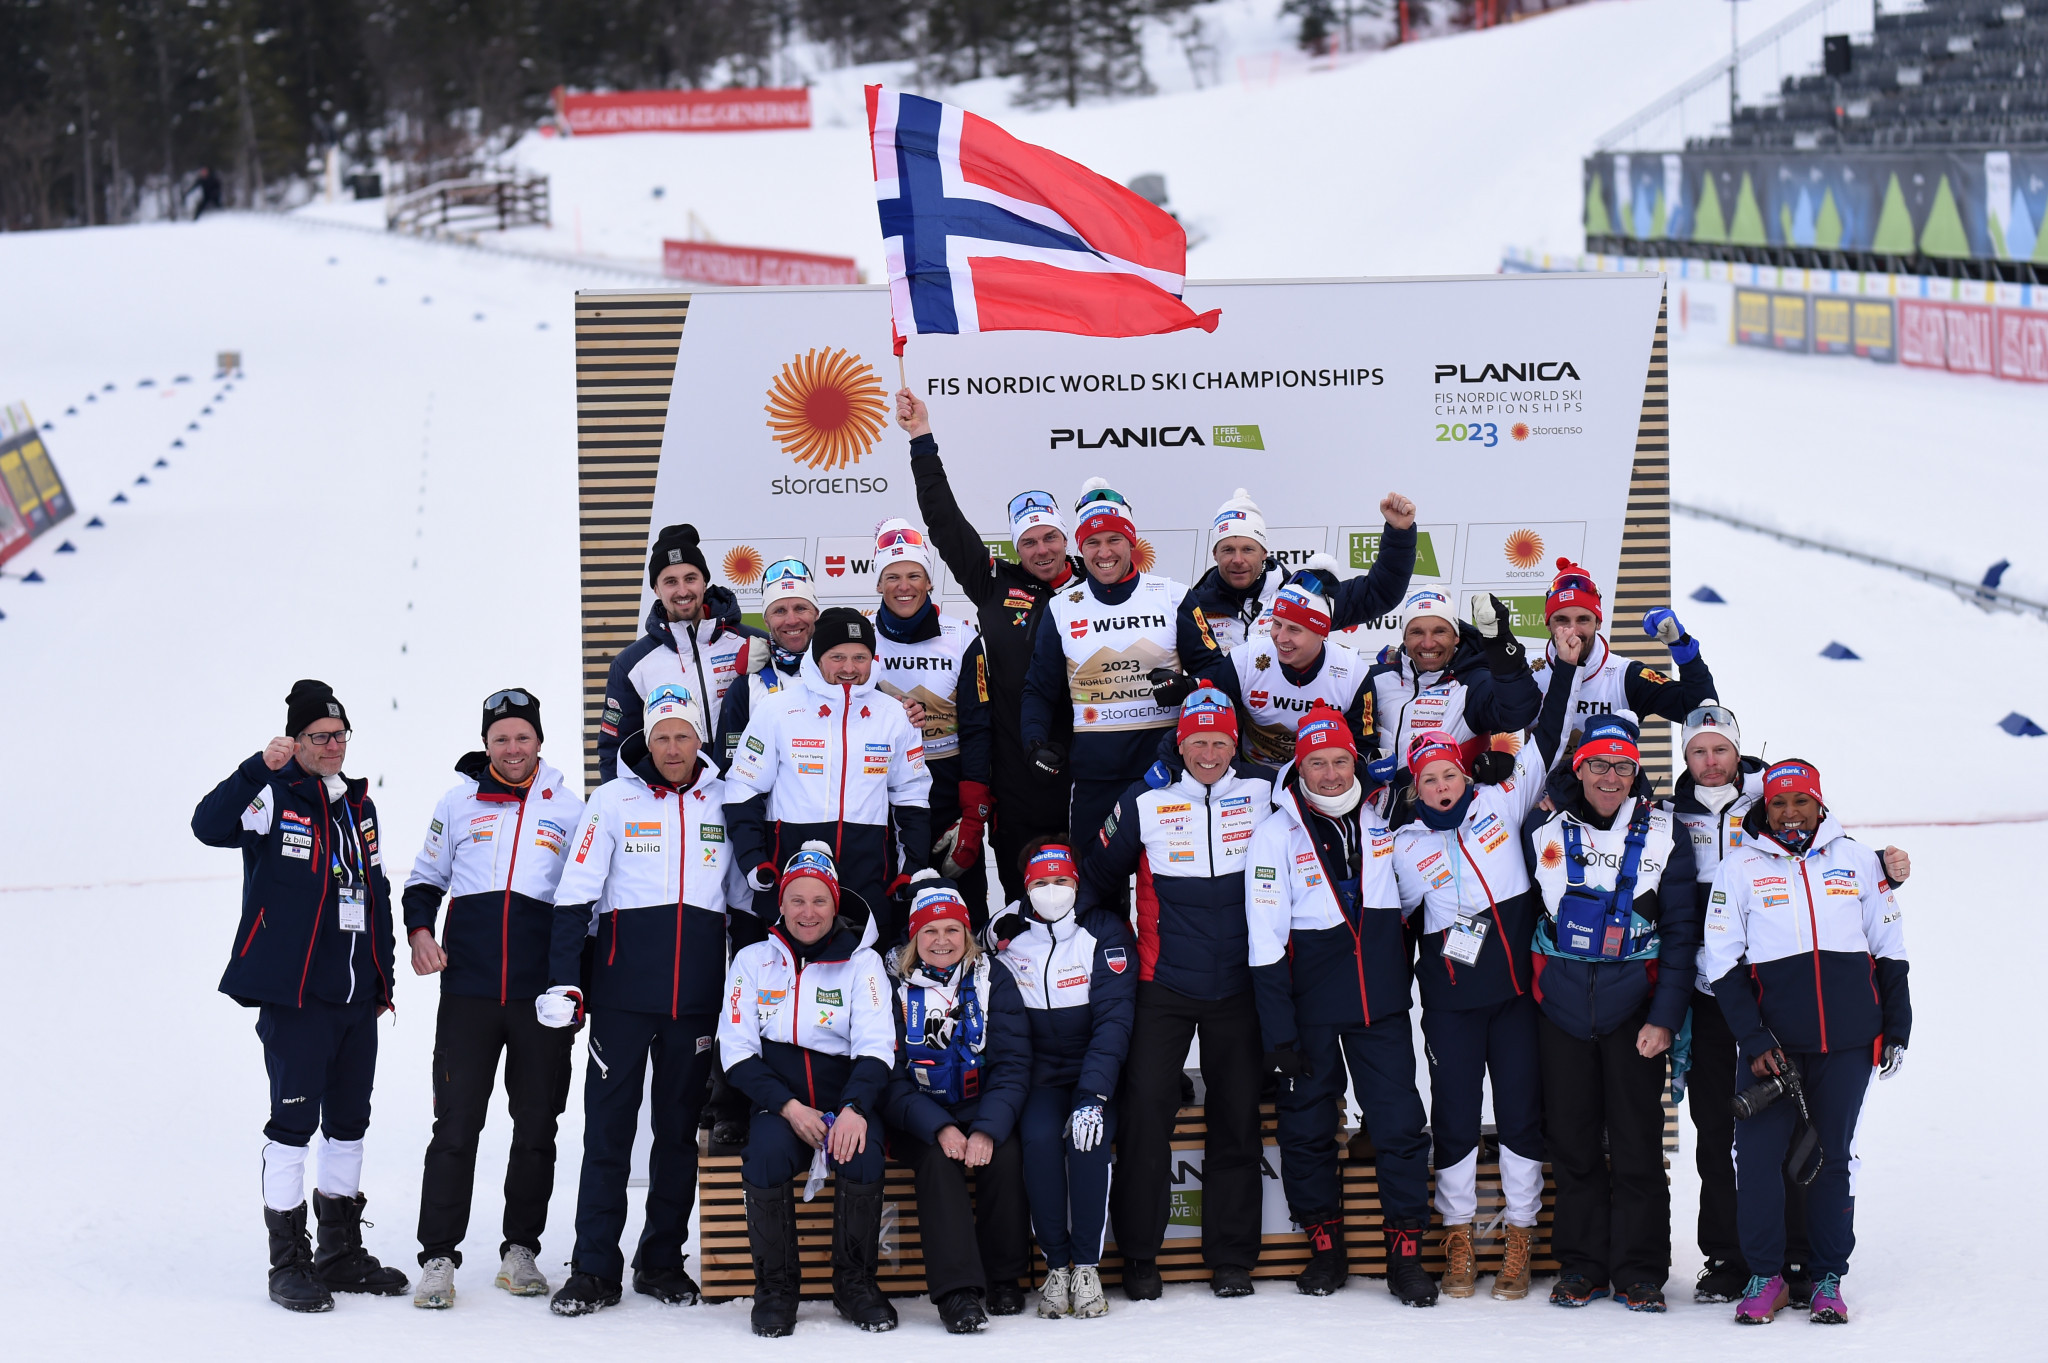  Norway registered their 12th gold medal at the FIS Nordic World Ski Championships by winning the men's 4x10 kilometres relay title in Planica ©Getty Images